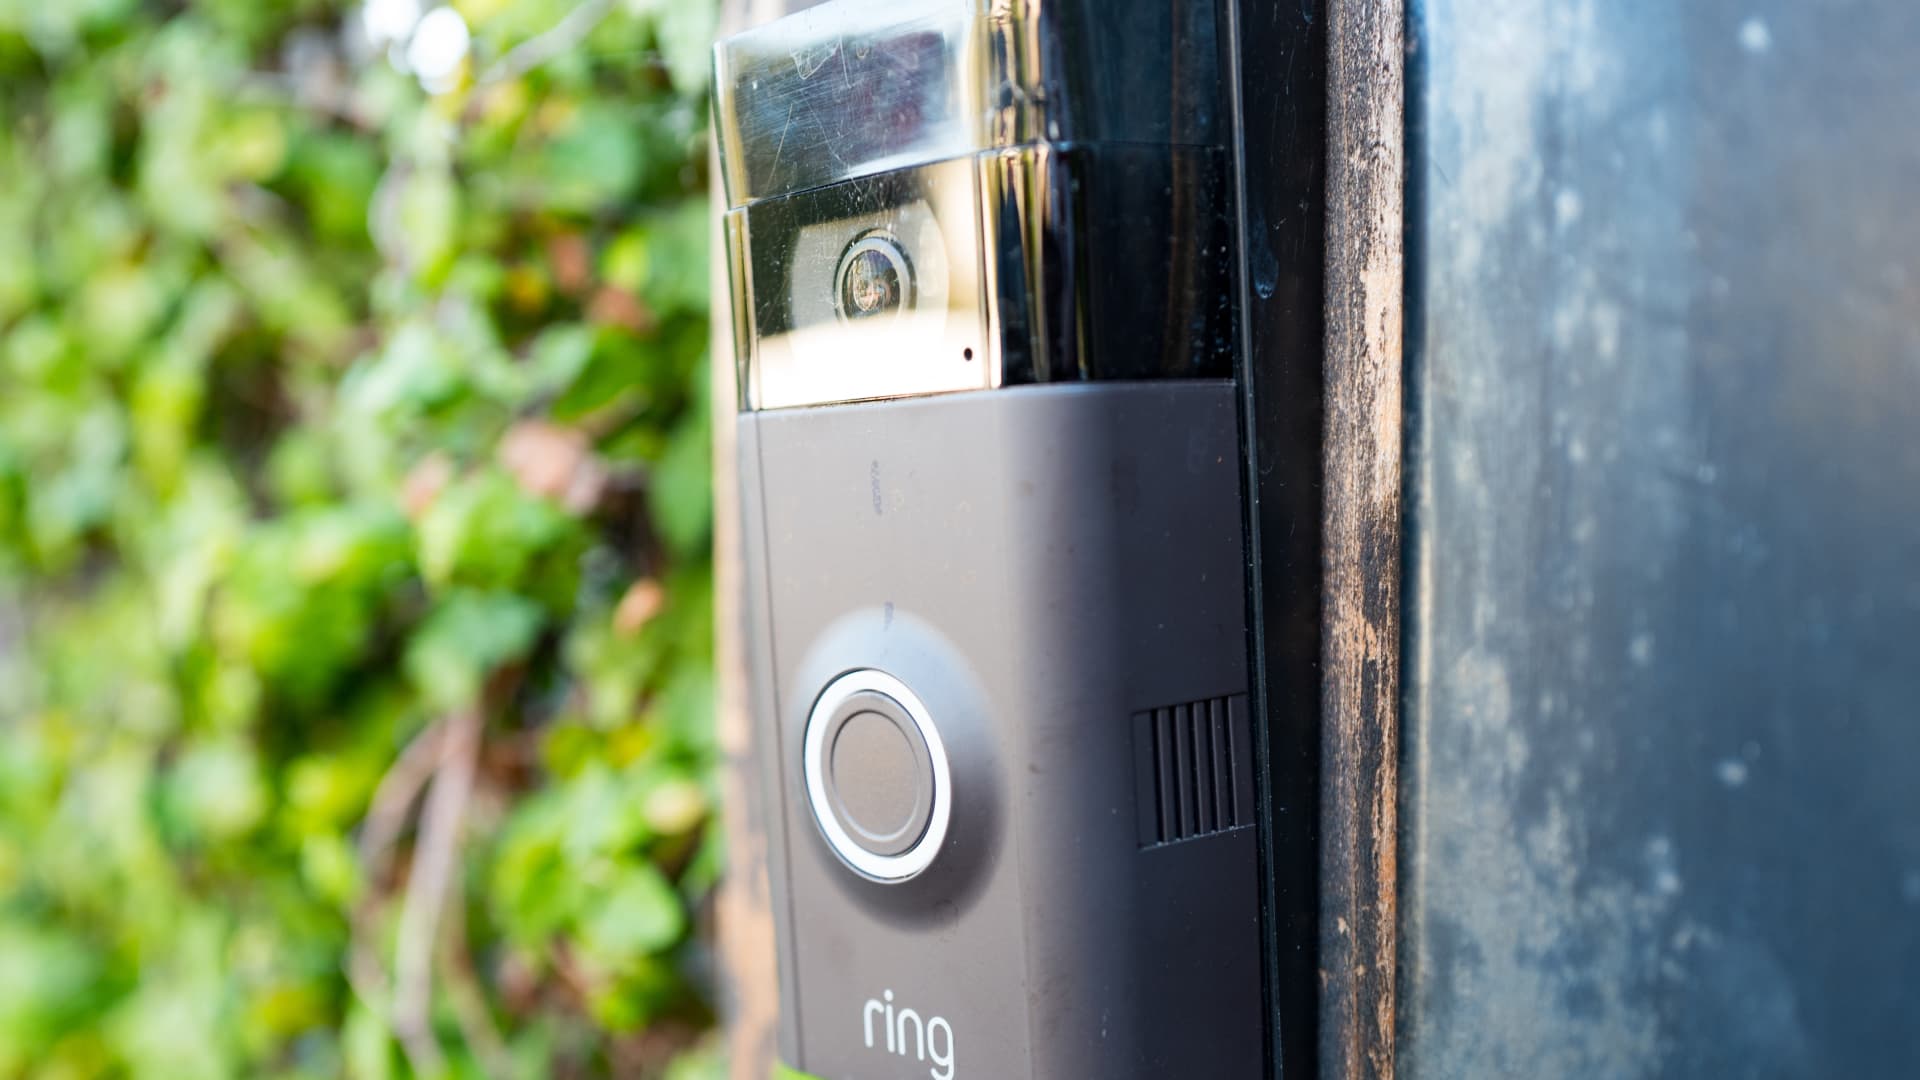 FTC sues Amazon’s Ring doorbell unit over privacy issues